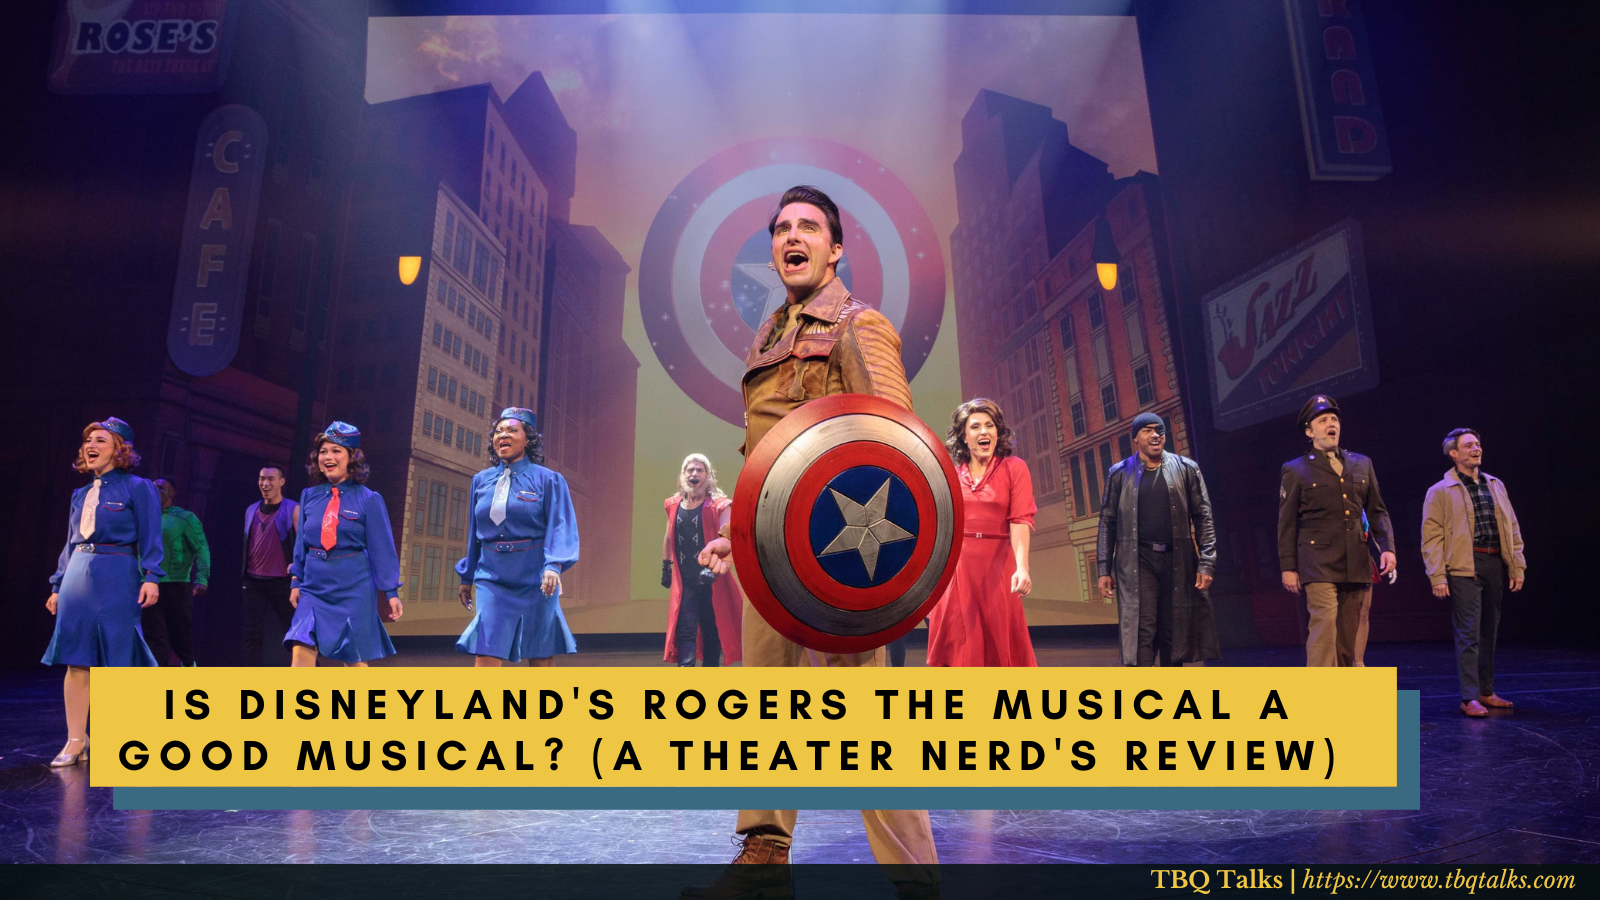 Is Disneyland's Rogers the Musical a Good Musical? (A Theater Nerd's Review)